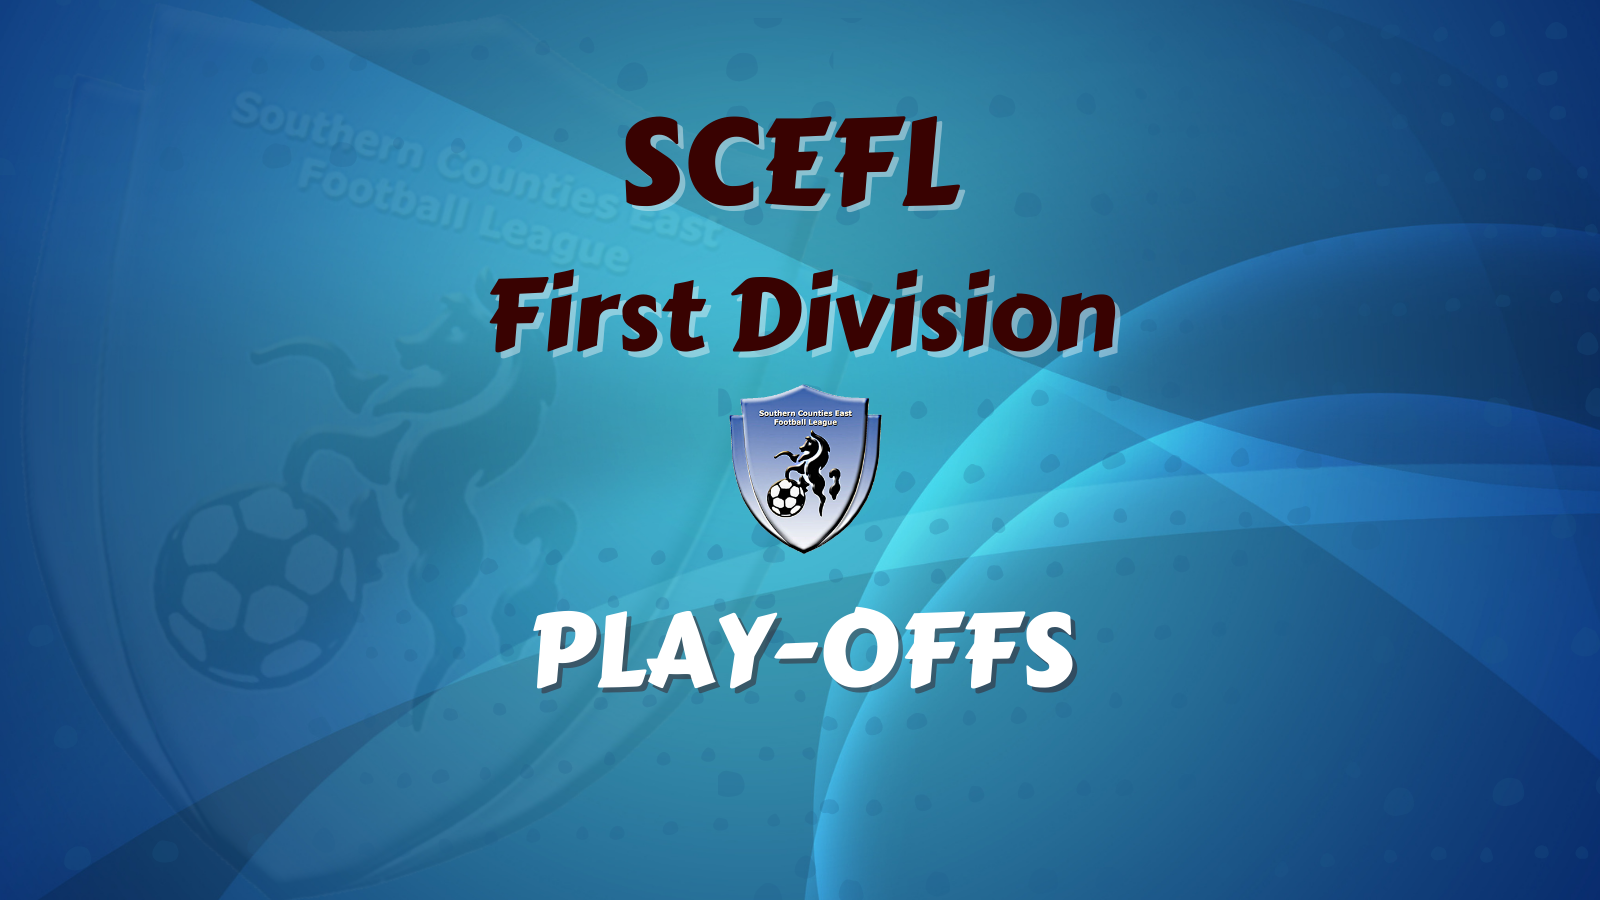 SCEFL First Division 2021/22